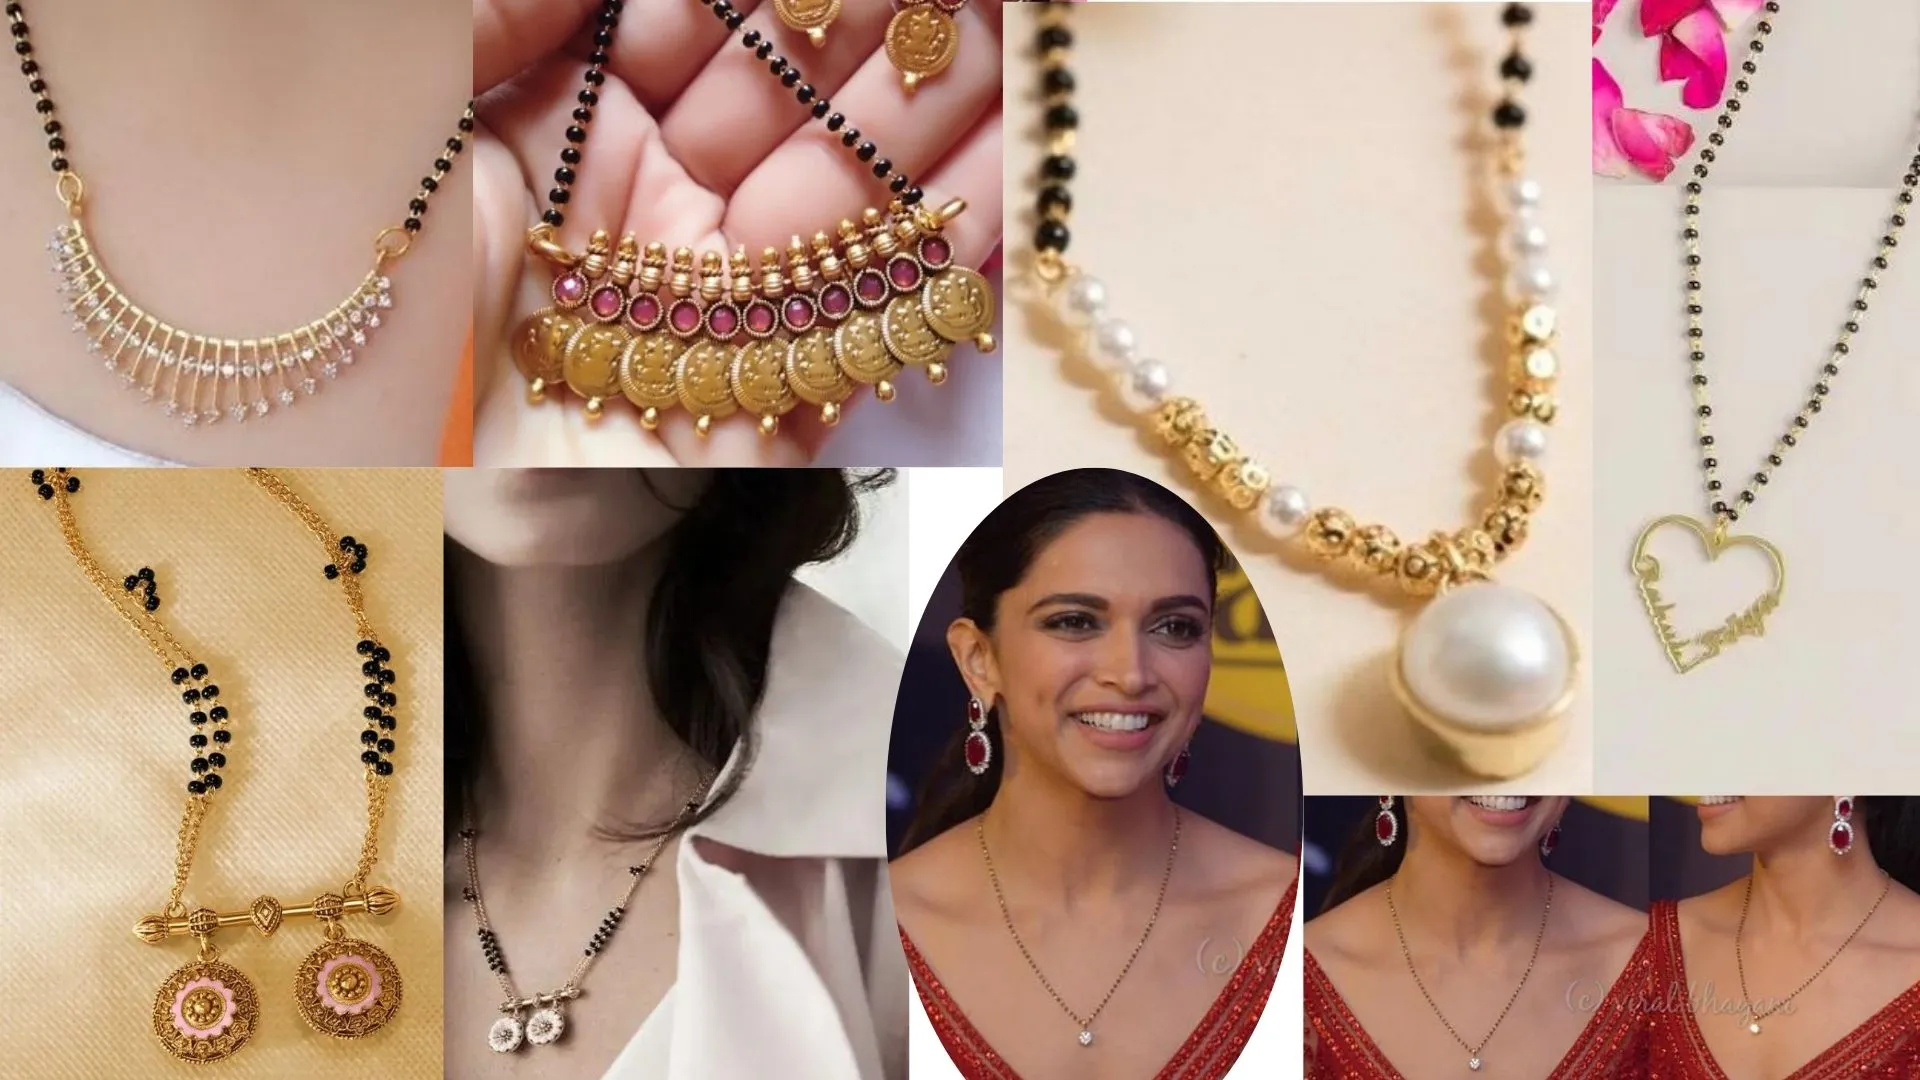 Many mangalsutra designers offer the option to personalize it by incorporating your initials, zodiac signs or a meaningful pendant for that personal touch.